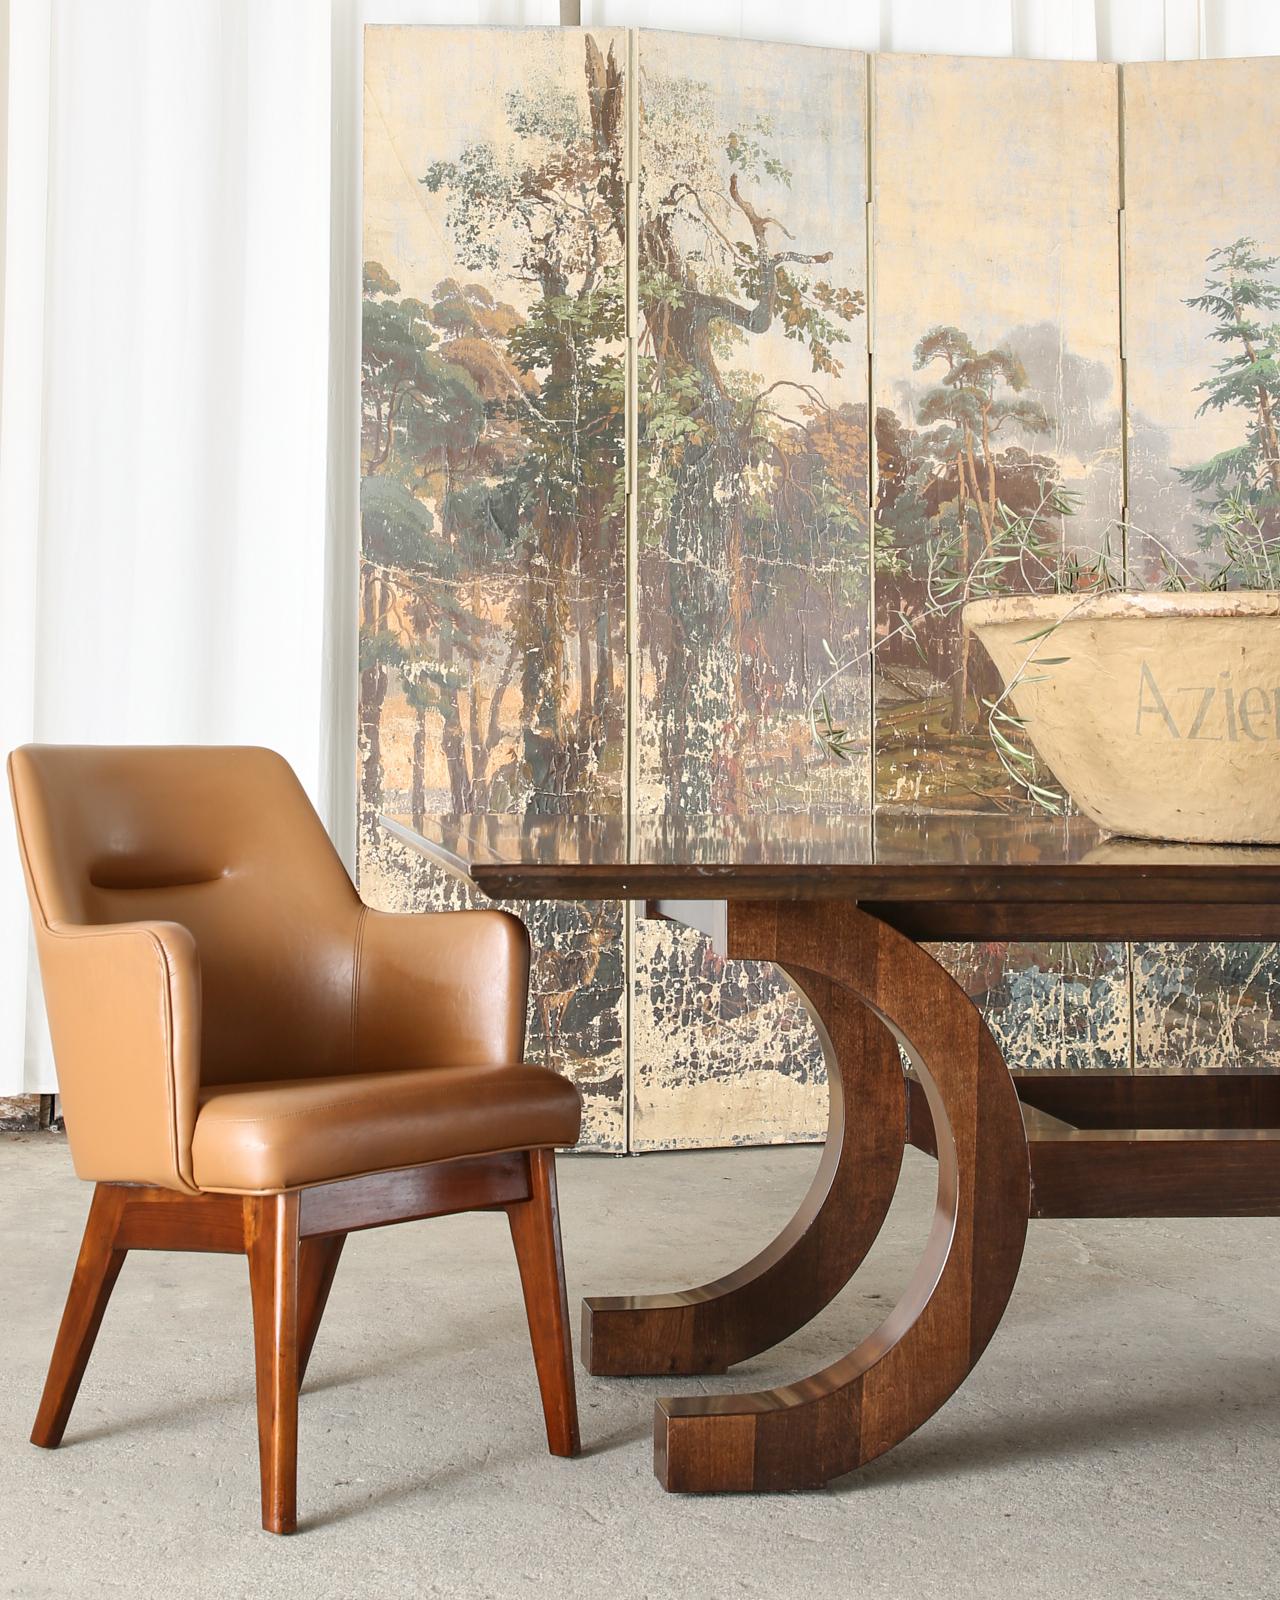 Two-sided Zuber and Cie screen that features a heavily distressed painting of a lush forest landscape. Intentionally aged, worn, and distressed with a beautiful patina. The other side features three wallpaper panels by Zuber and Cie from the